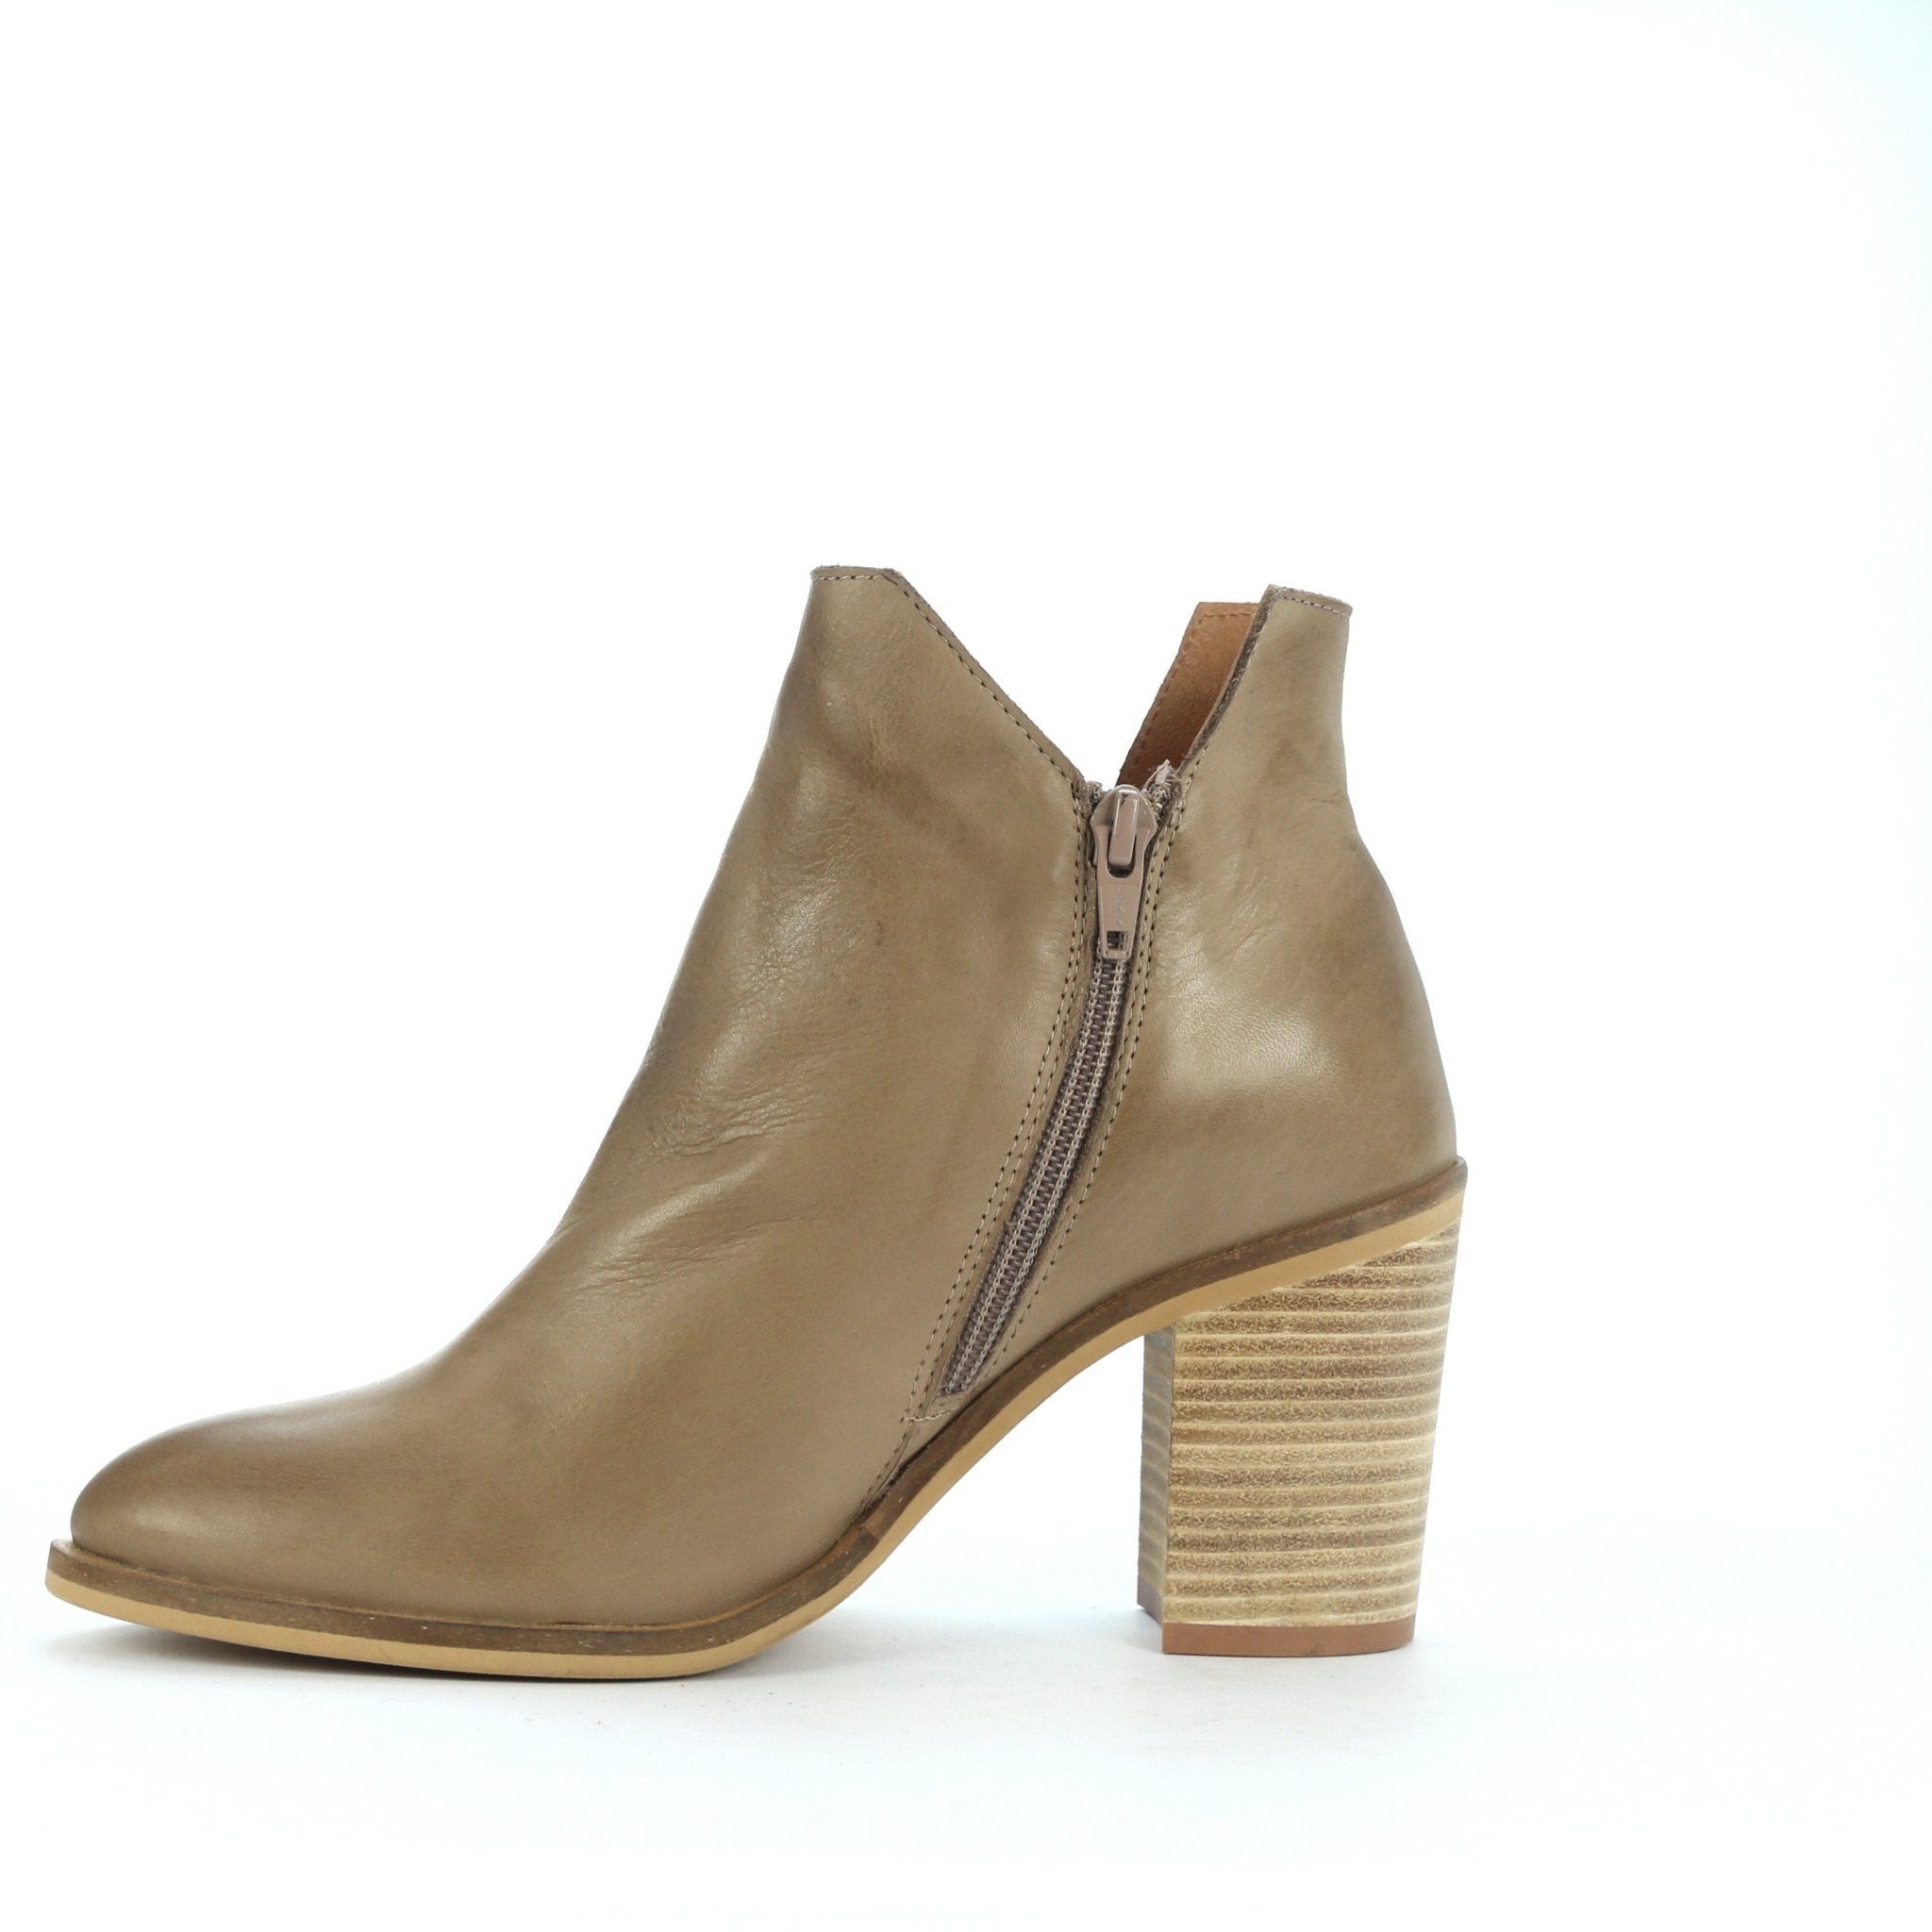 NOORT - EOS Footwear - Ankle Boots #color_Taupe